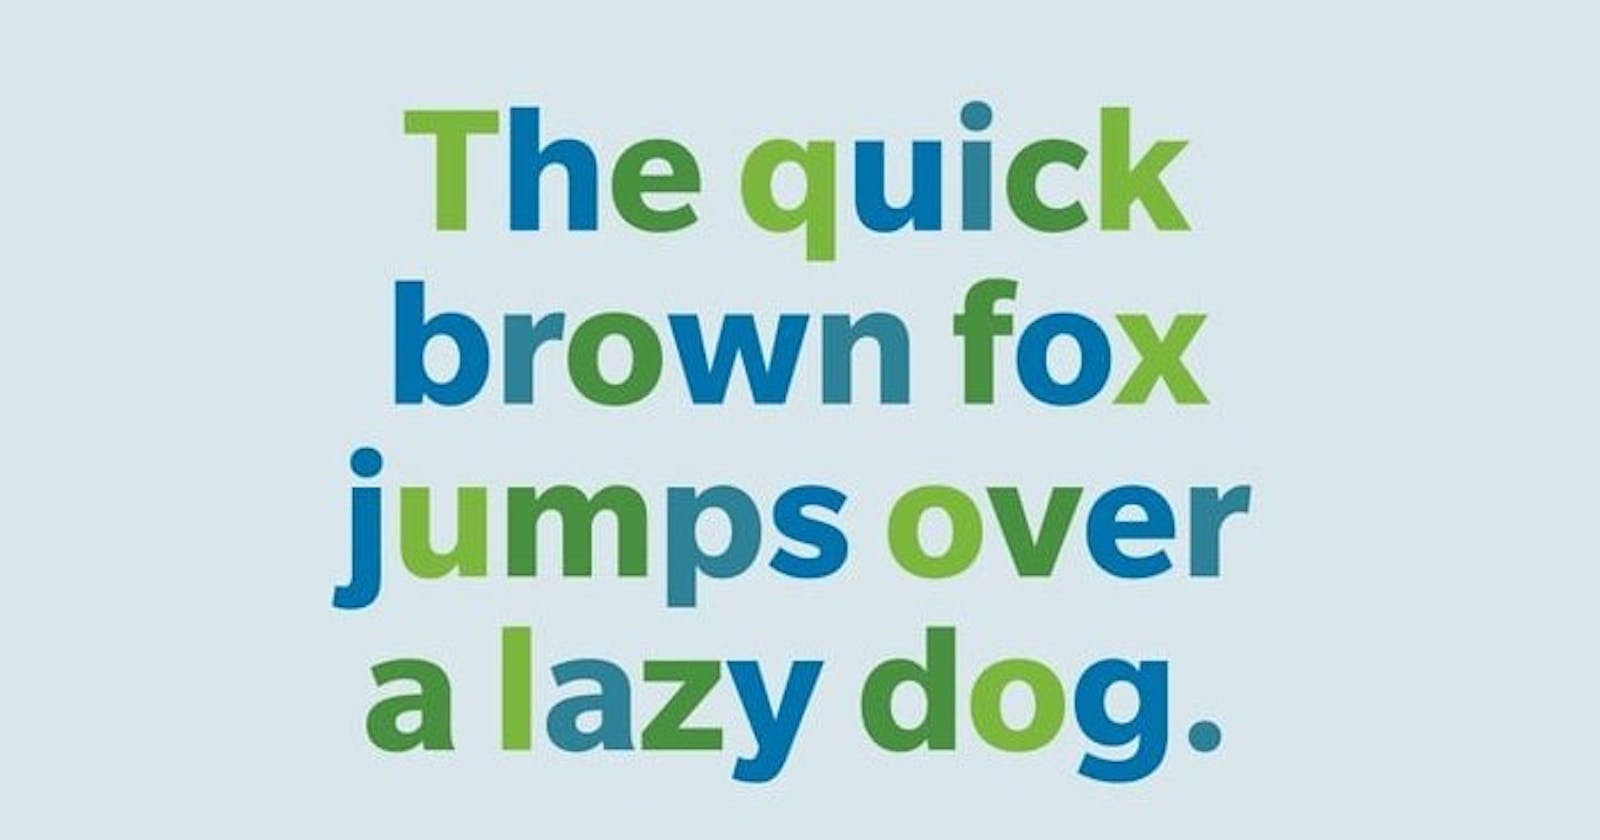 Check if the String is Pangram